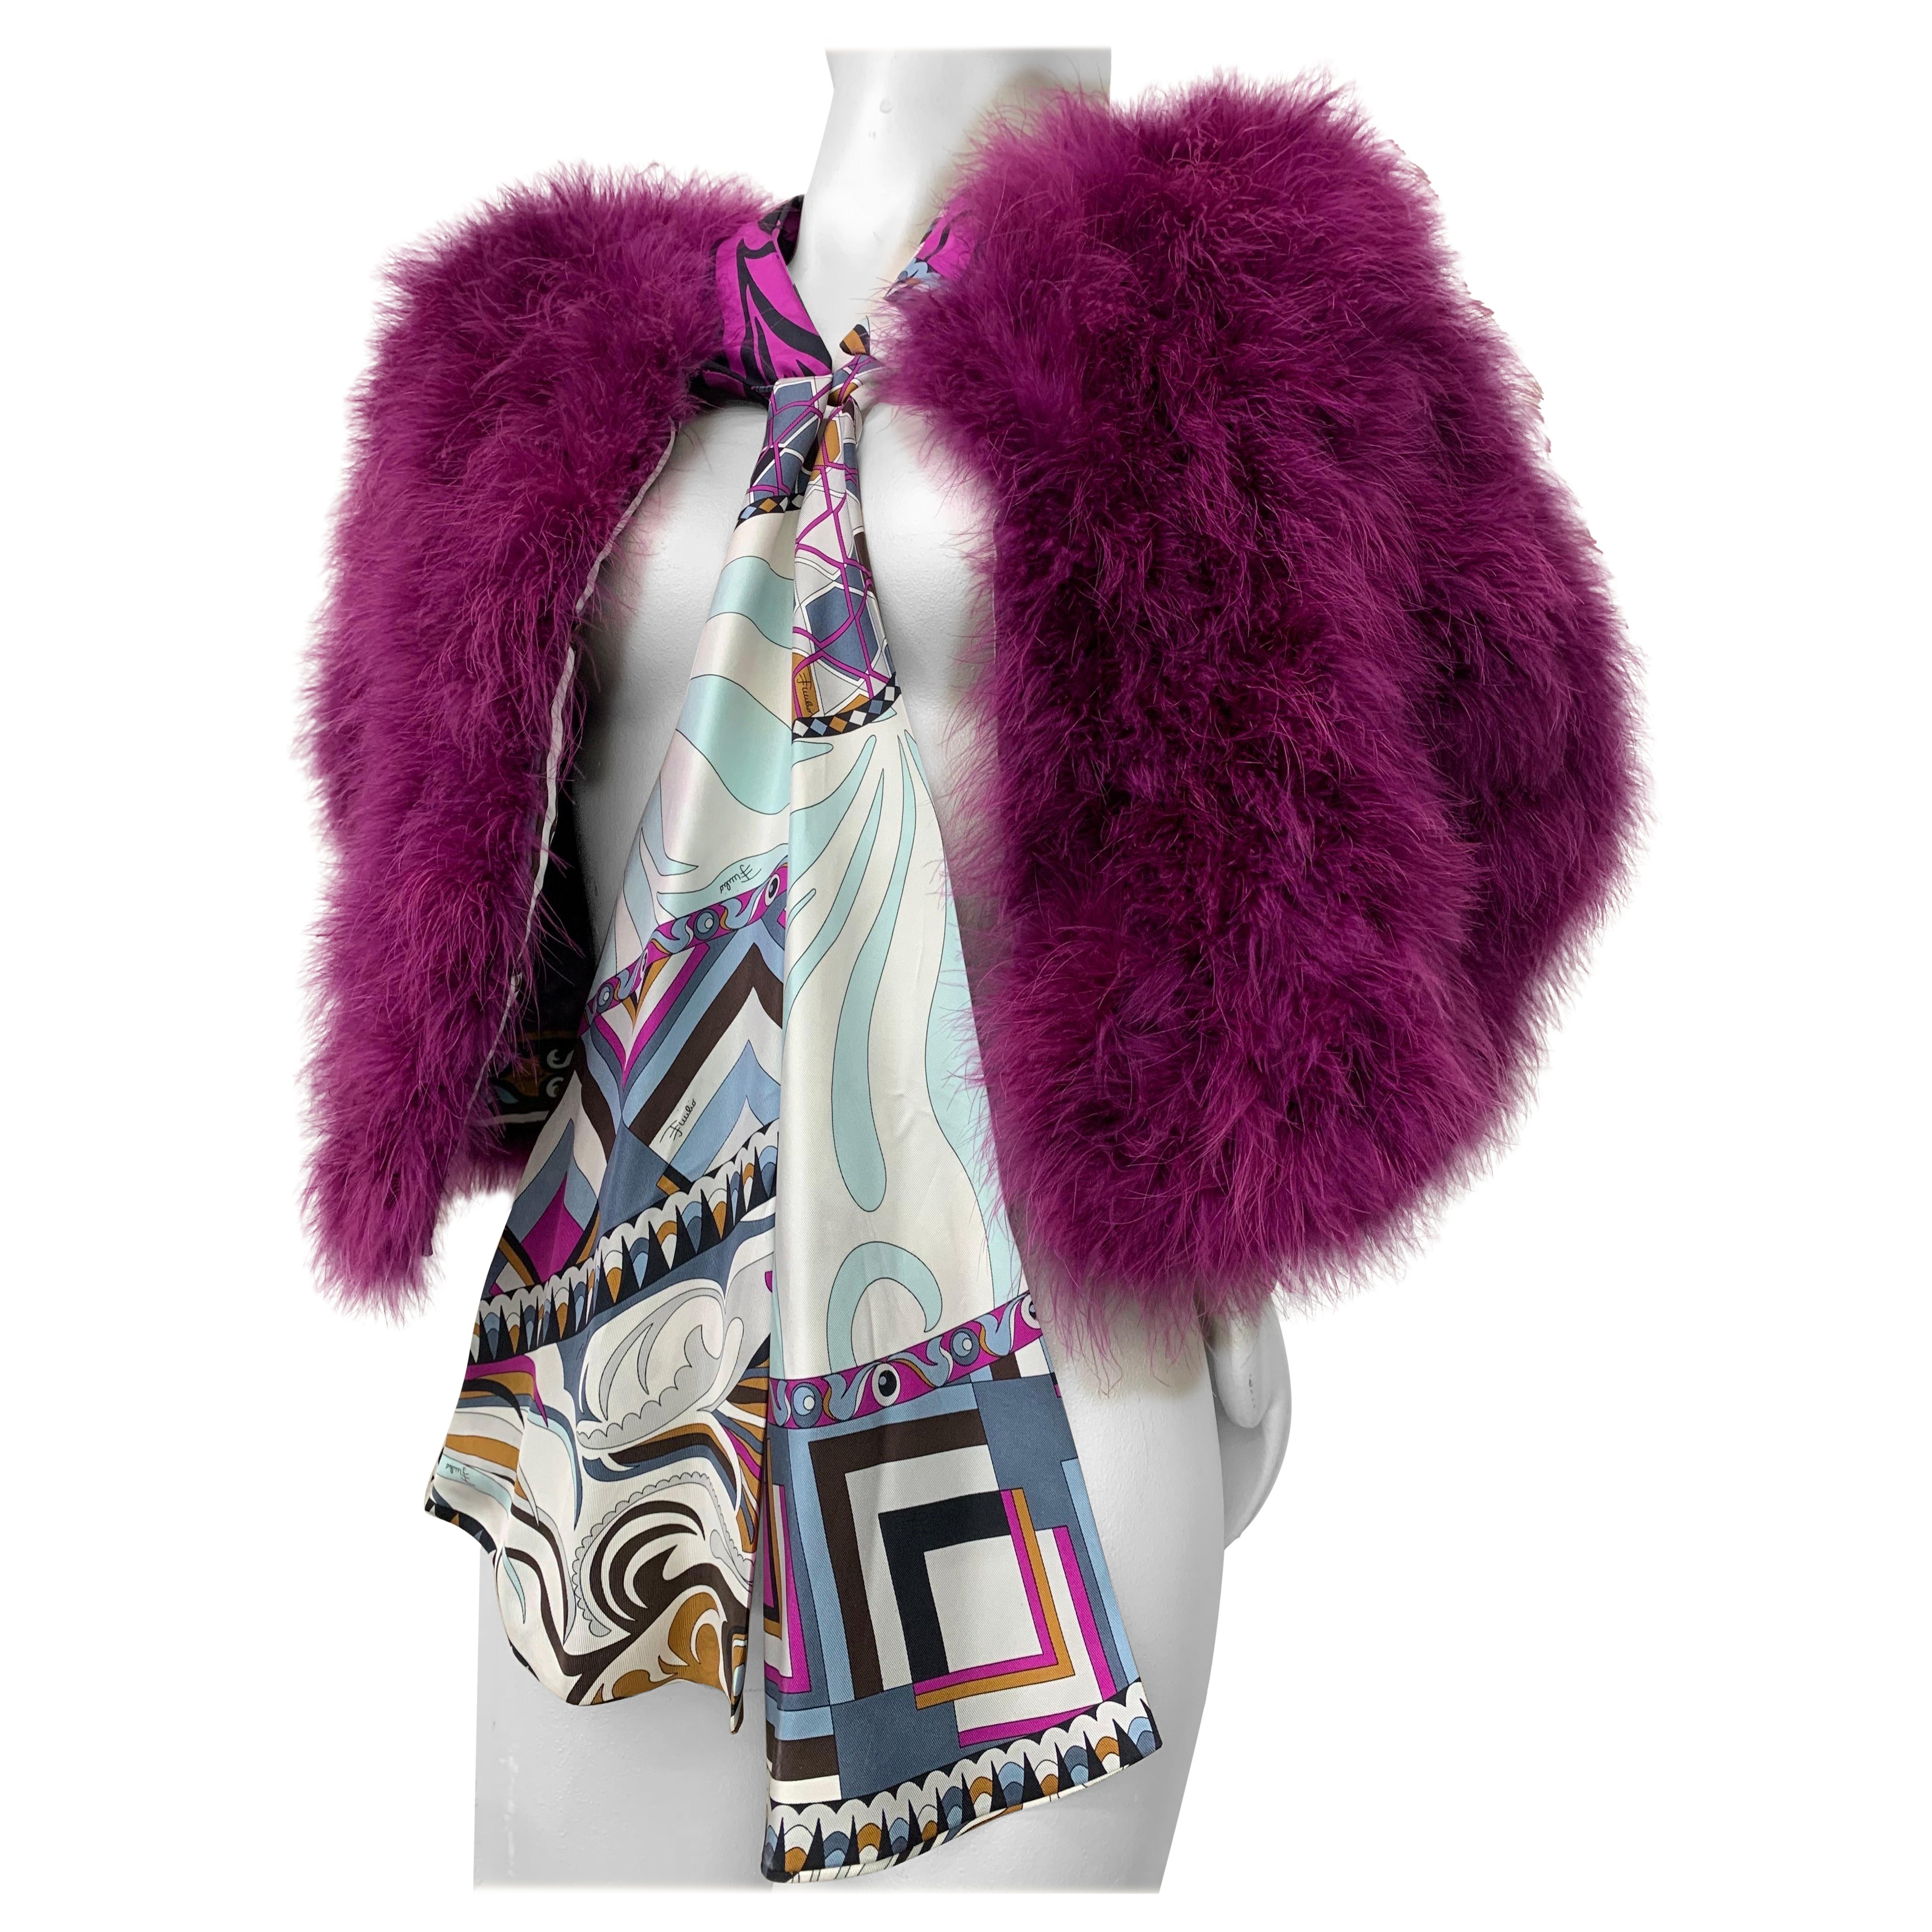 Torso Creations Magenta Marabou Chubby Jacket w Pucci Scarf Tie at Neckline For Sale